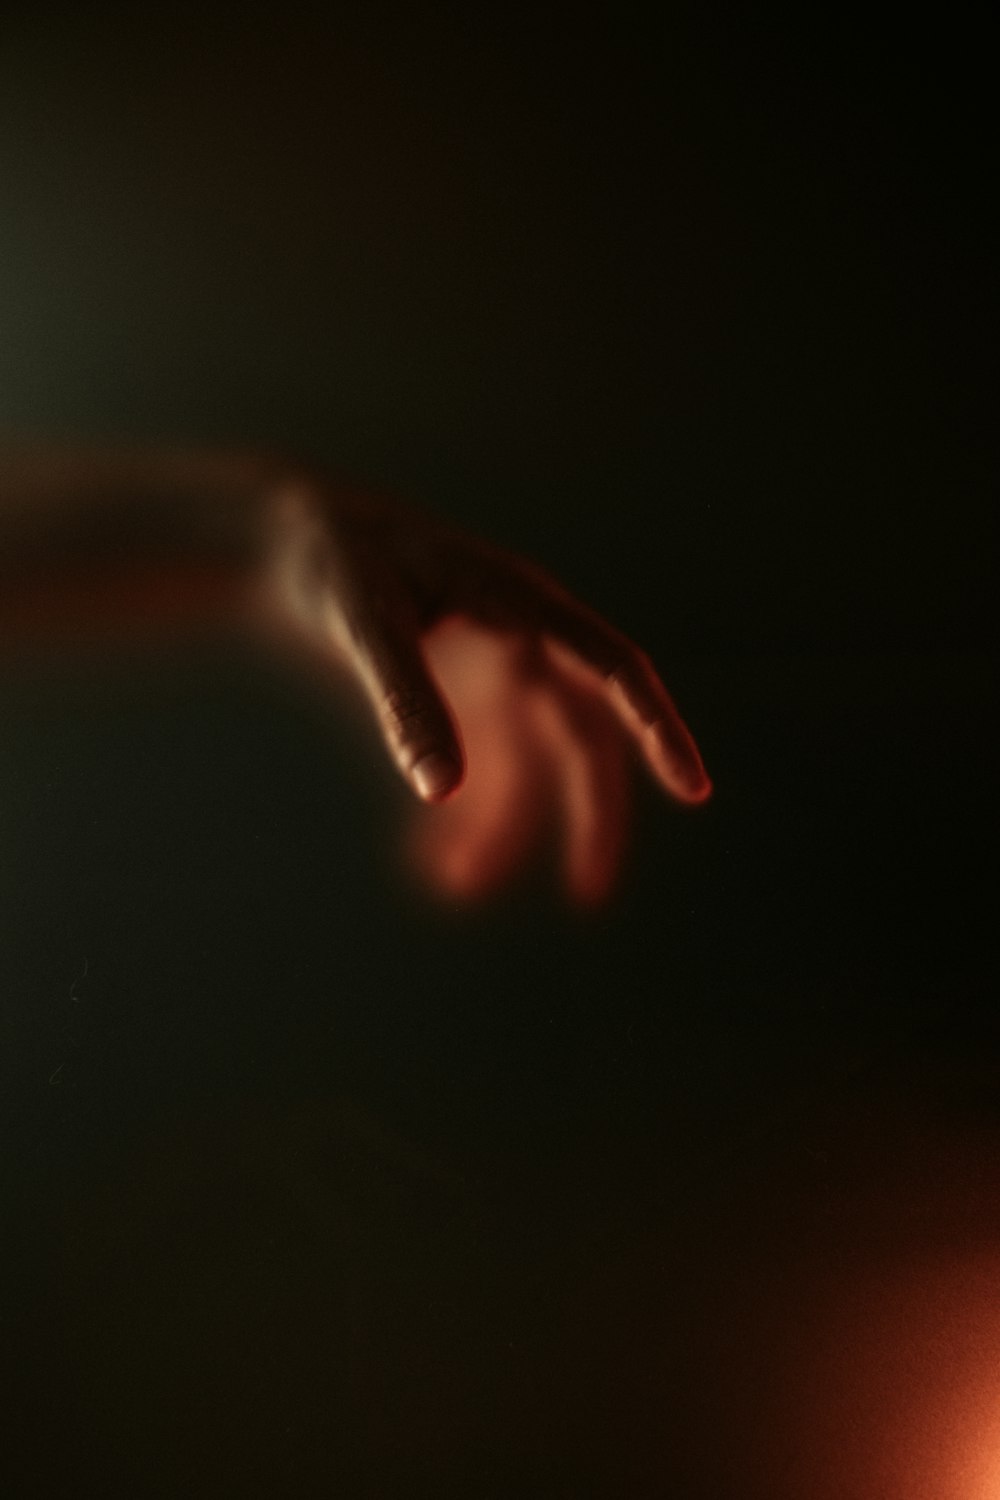 a blurry image of a person's hand reaching for something